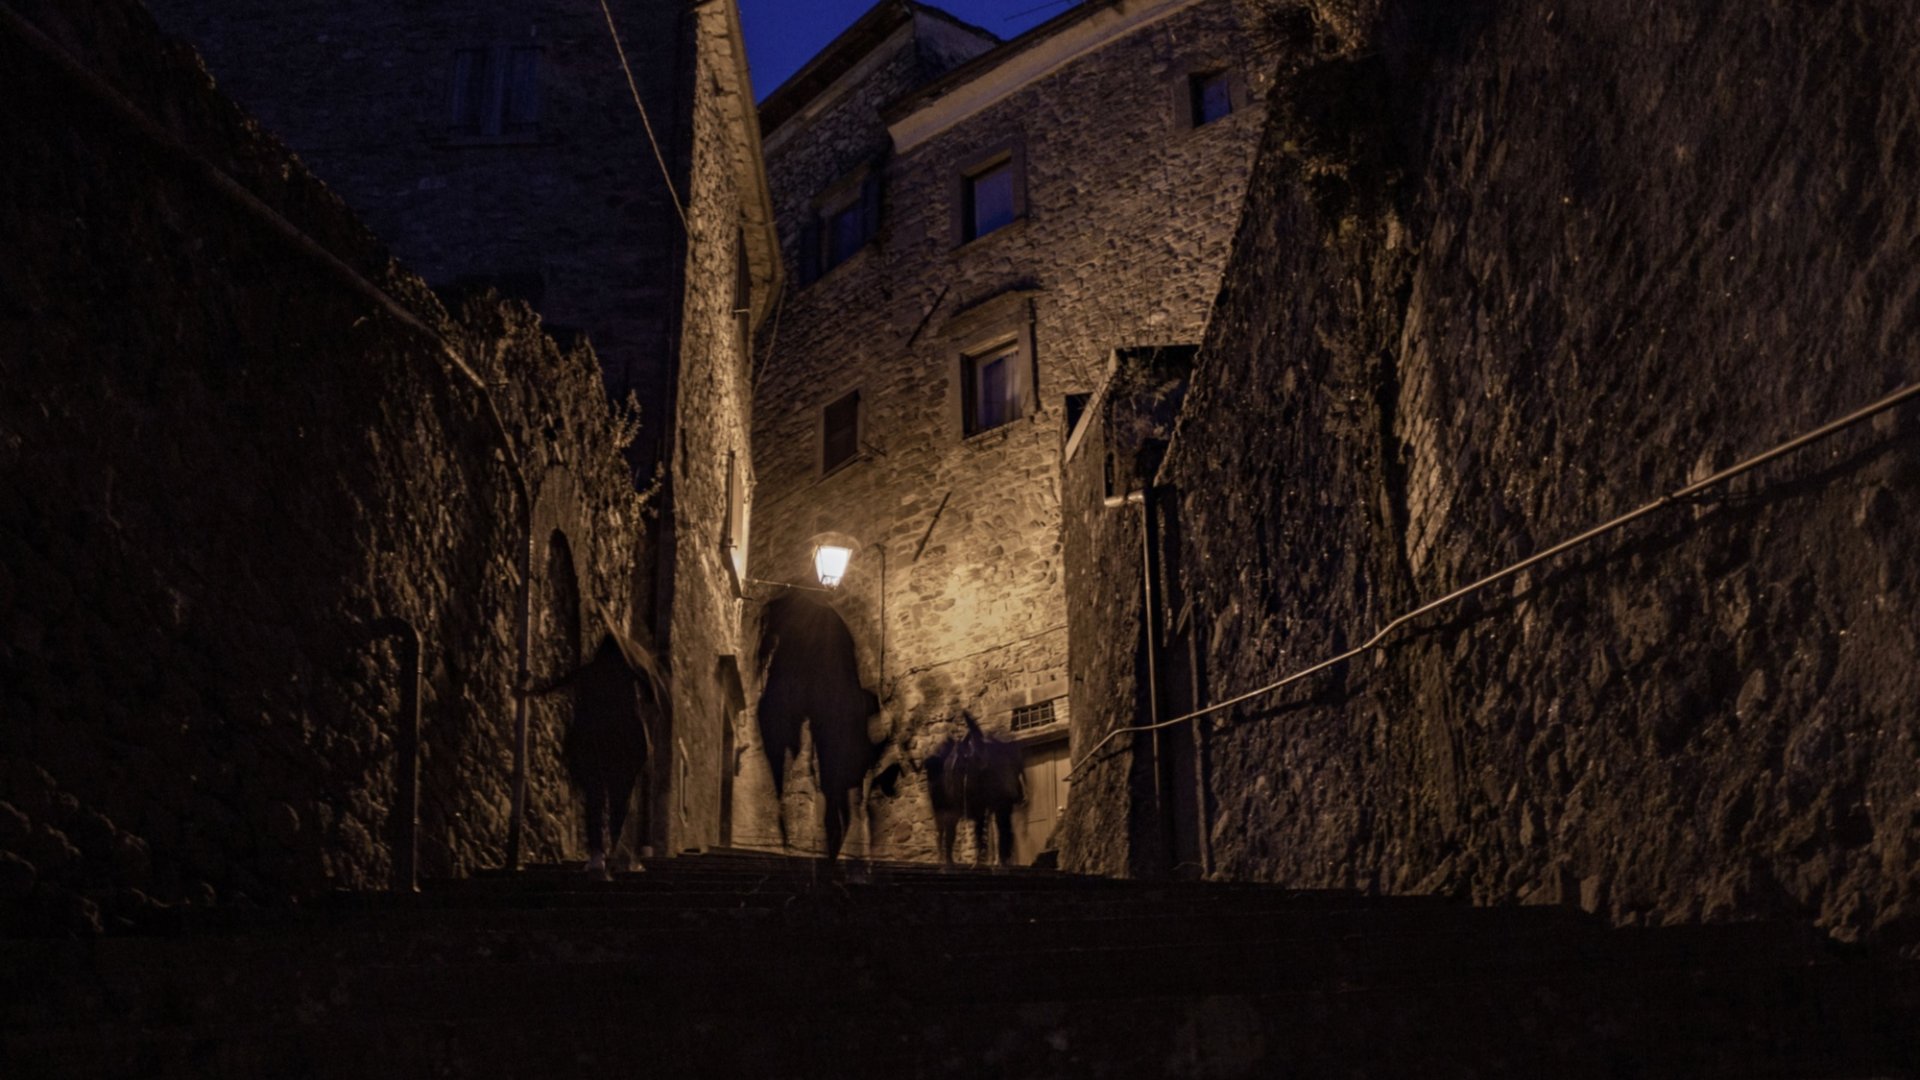 A mixture of fear, curiosity and suspense will accompany you on this unusual visit to Pontremoli.